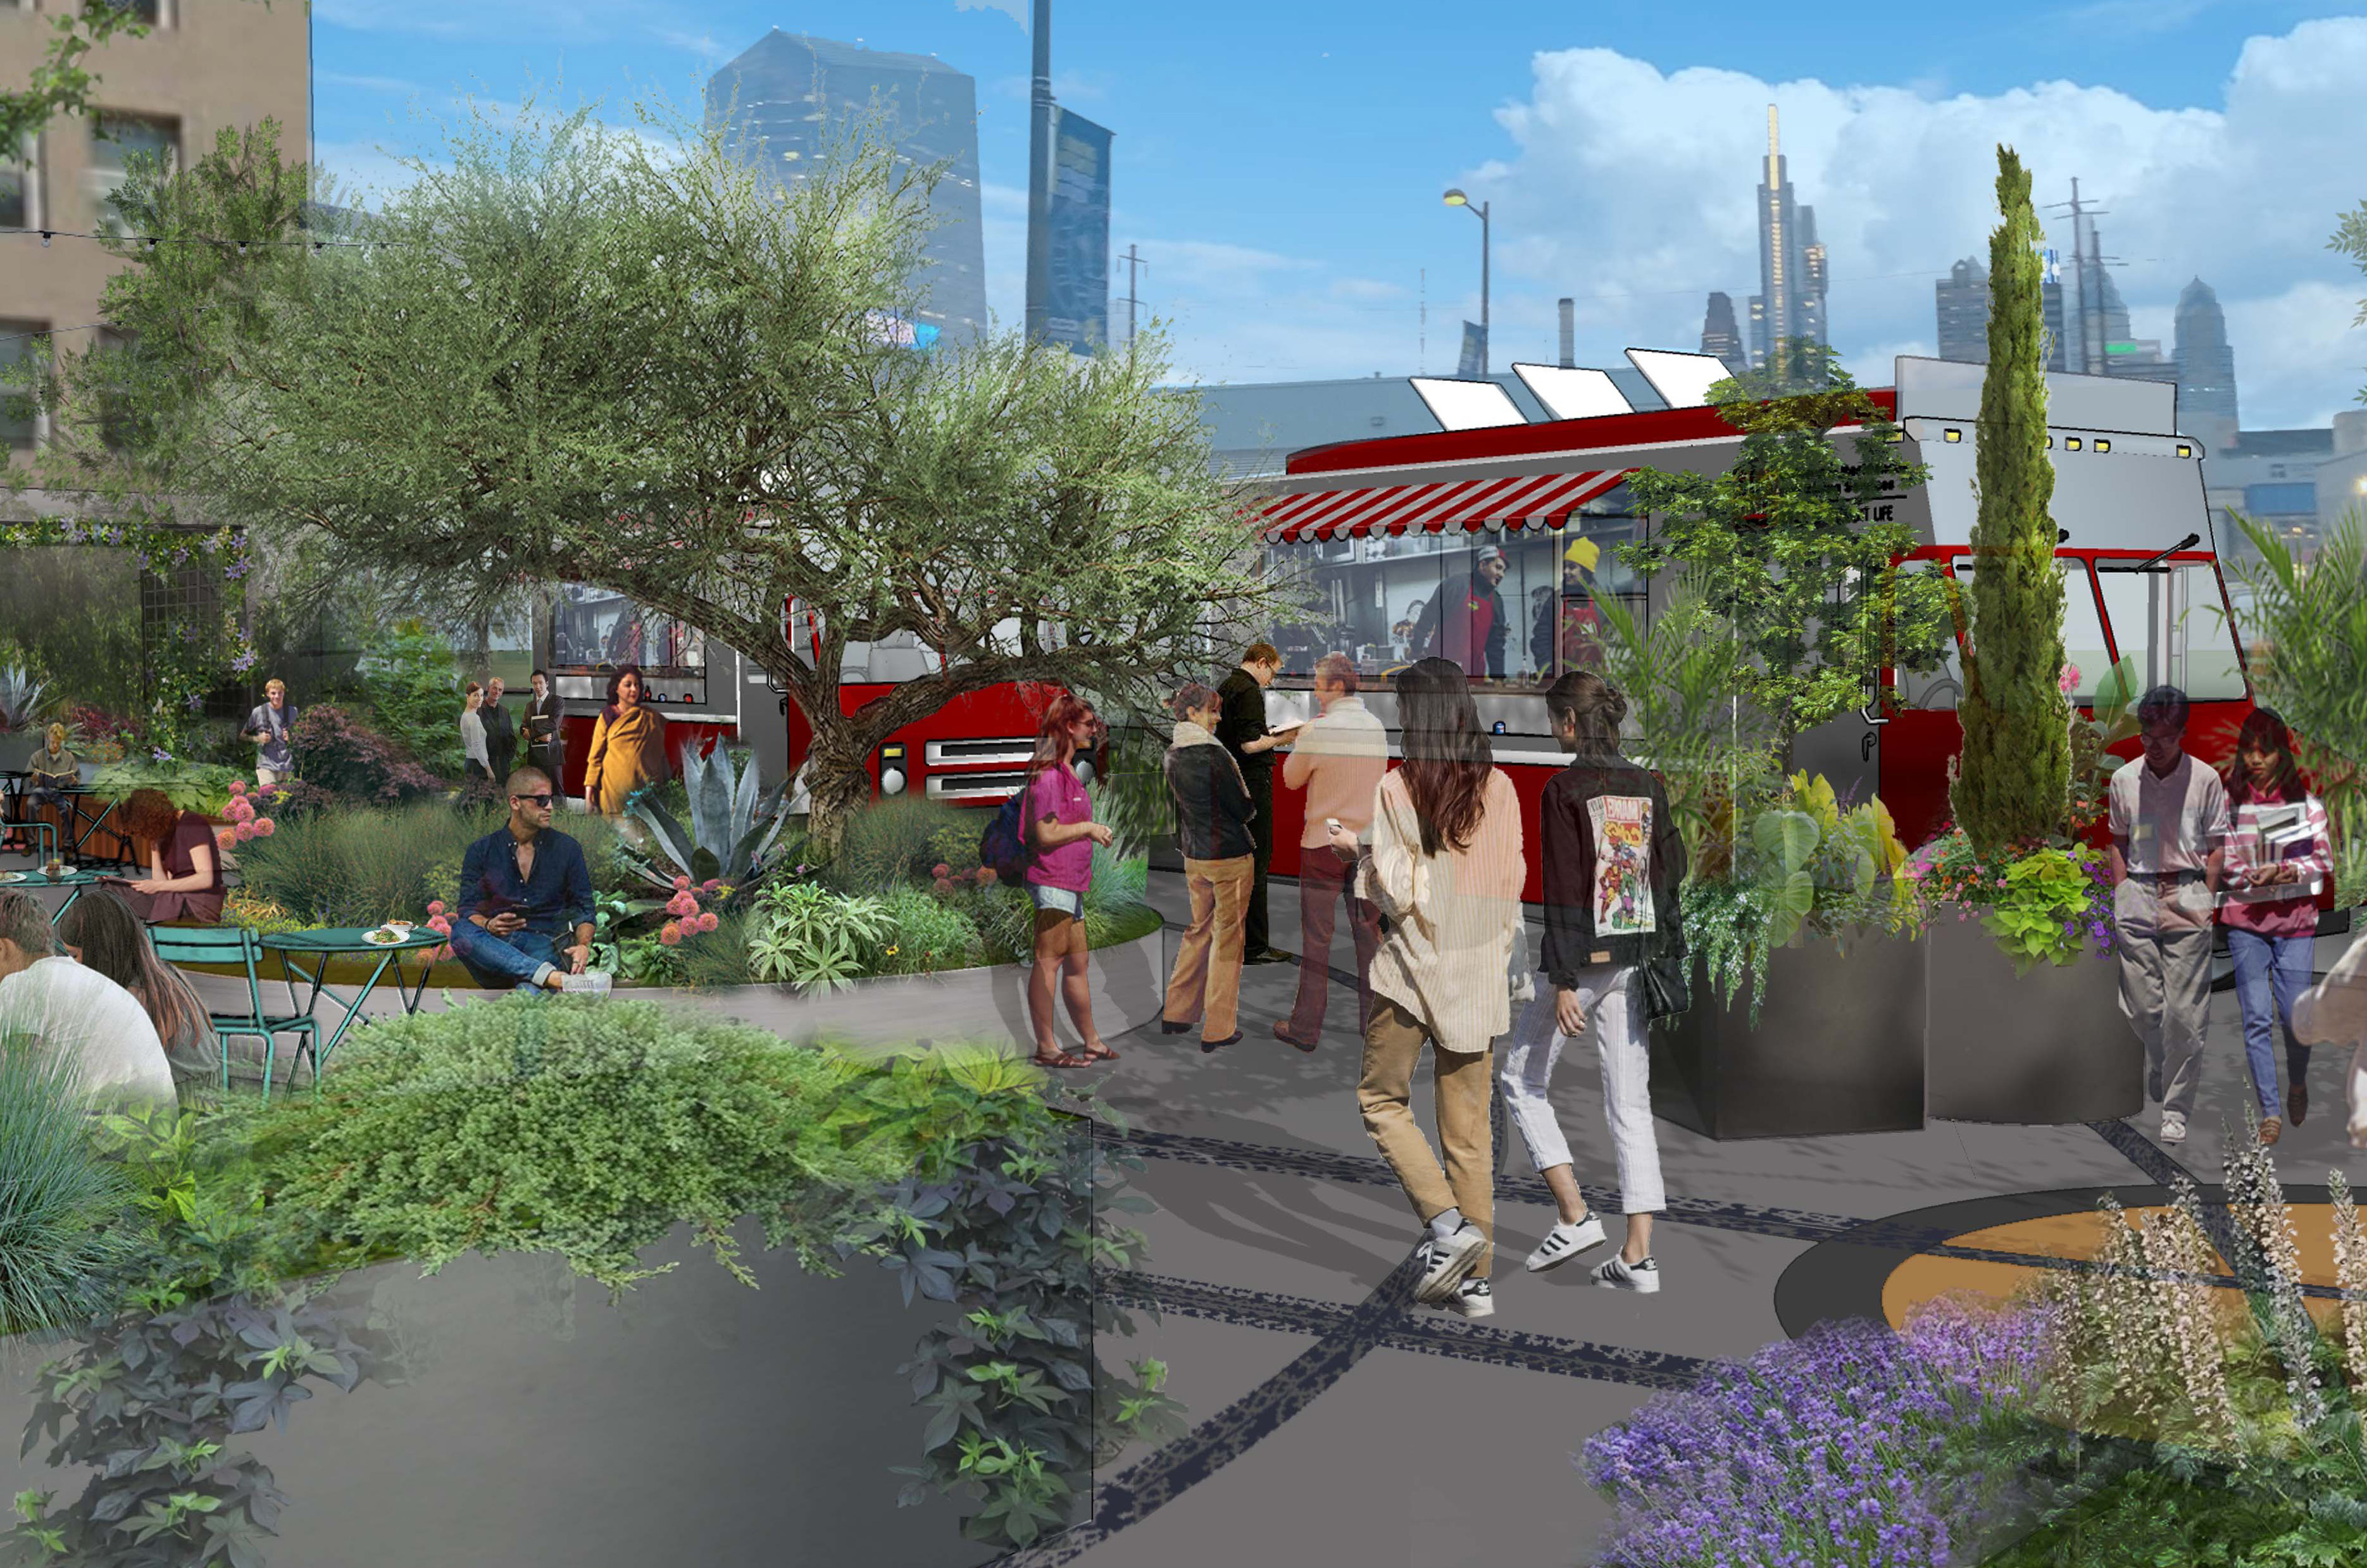 rendering of the garden at 32nd and Market Streets with seating and trucks